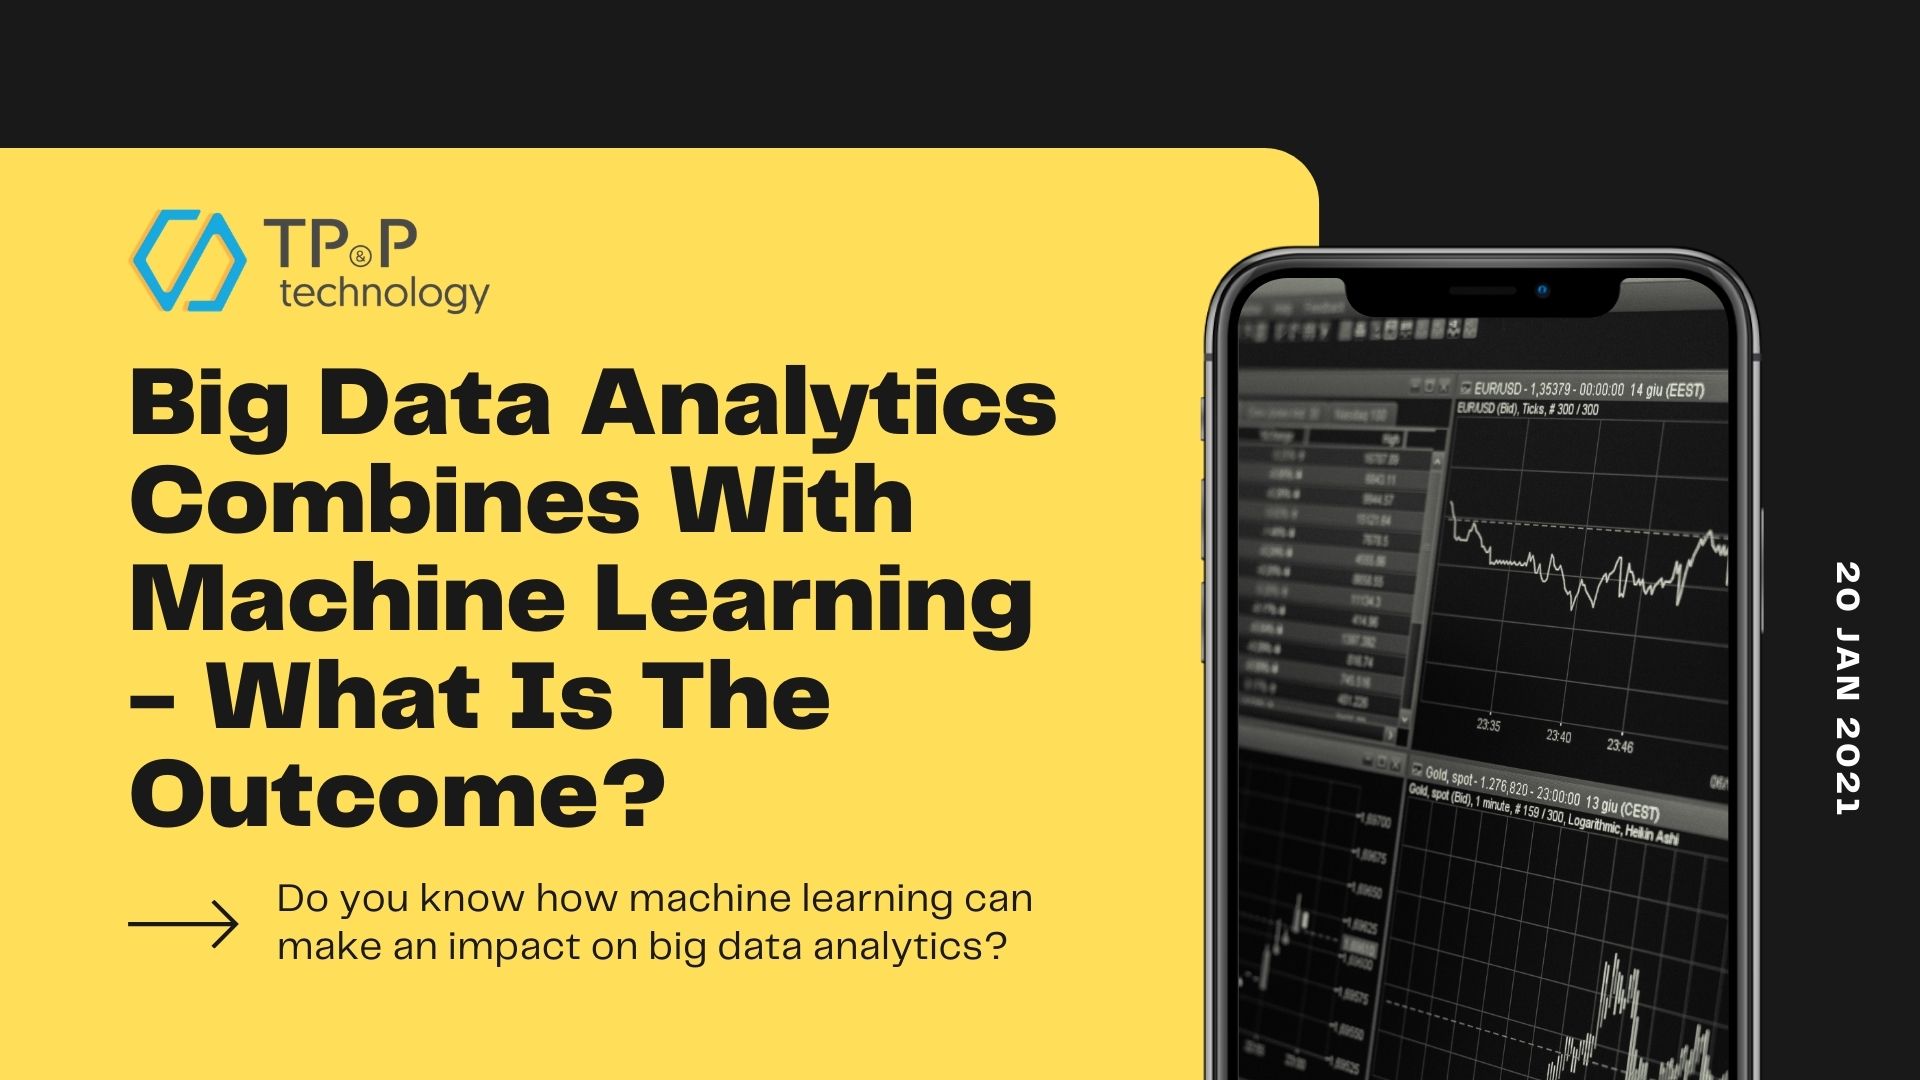 Big Data Analytics Combines With Machine Learning - What Is The Outcome?